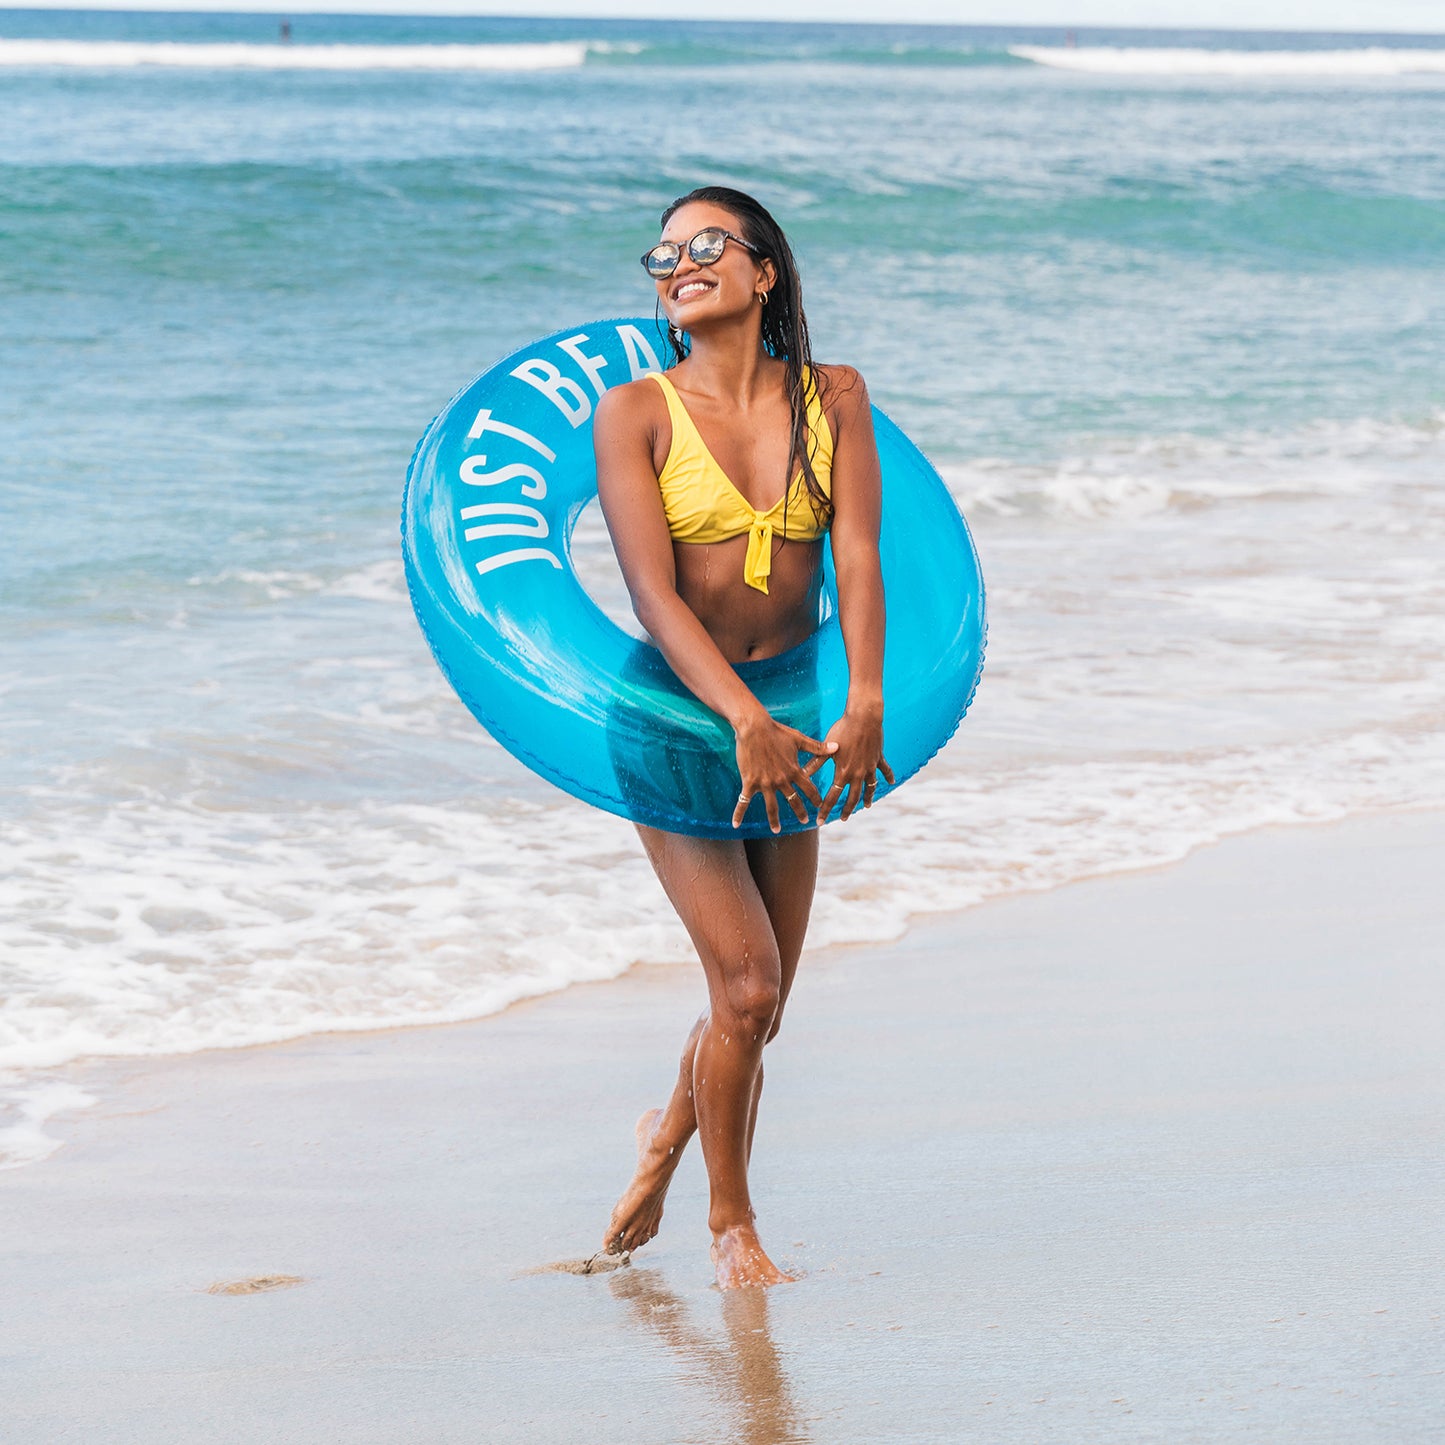 Experience endless fun in the sun with the Sweet Shop Blue Raspberry Inflatable Pool Tube - a durable, comfortable, and versatile swim ring for all ages.